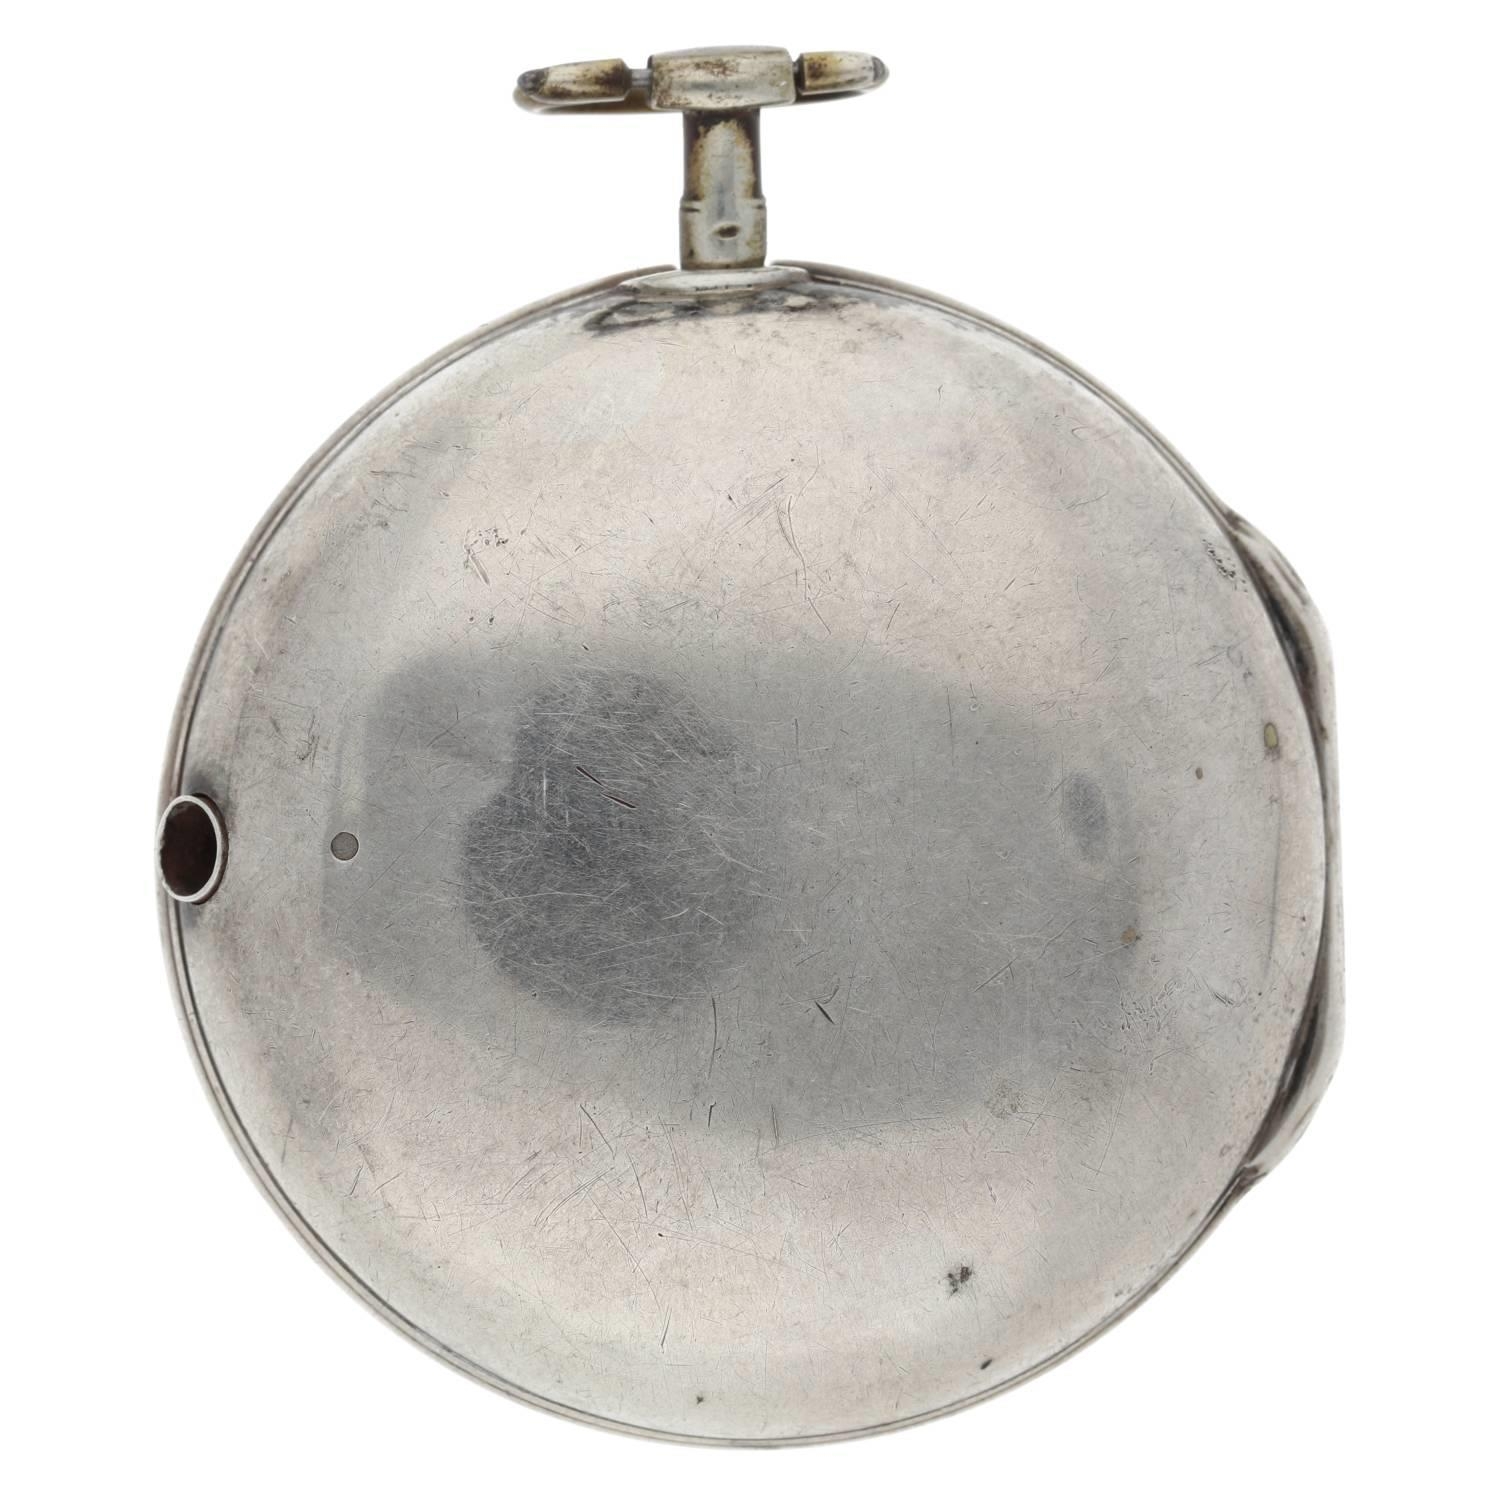 Jno. Lownt, Fecit - George III English silver pair cased verge pocket watch, London 1769, signed - Image 8 of 10